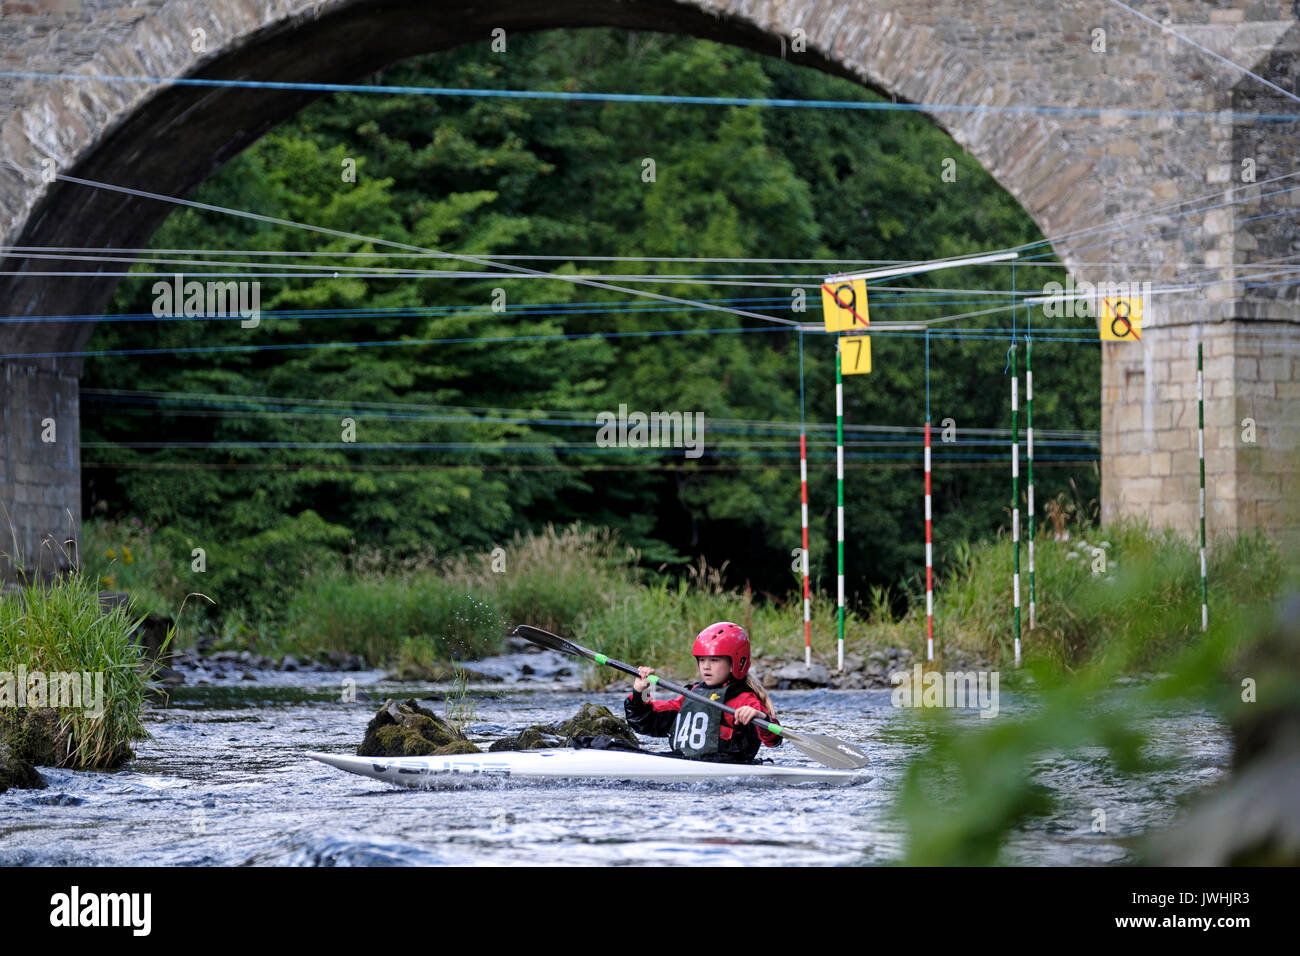 River Tweed, Yair Bridge, Selkirk, UK. 13th August 2017. Canoe Slalom at Yair Bridge A canoeist negotiates the slalom course at Yair Bridge, on the River Tweed, near Selkirk during the Div 2/3 and Scottish J14 & J12 Championships. The event organised by local club Leithen Water Paddlers. Stock Photo